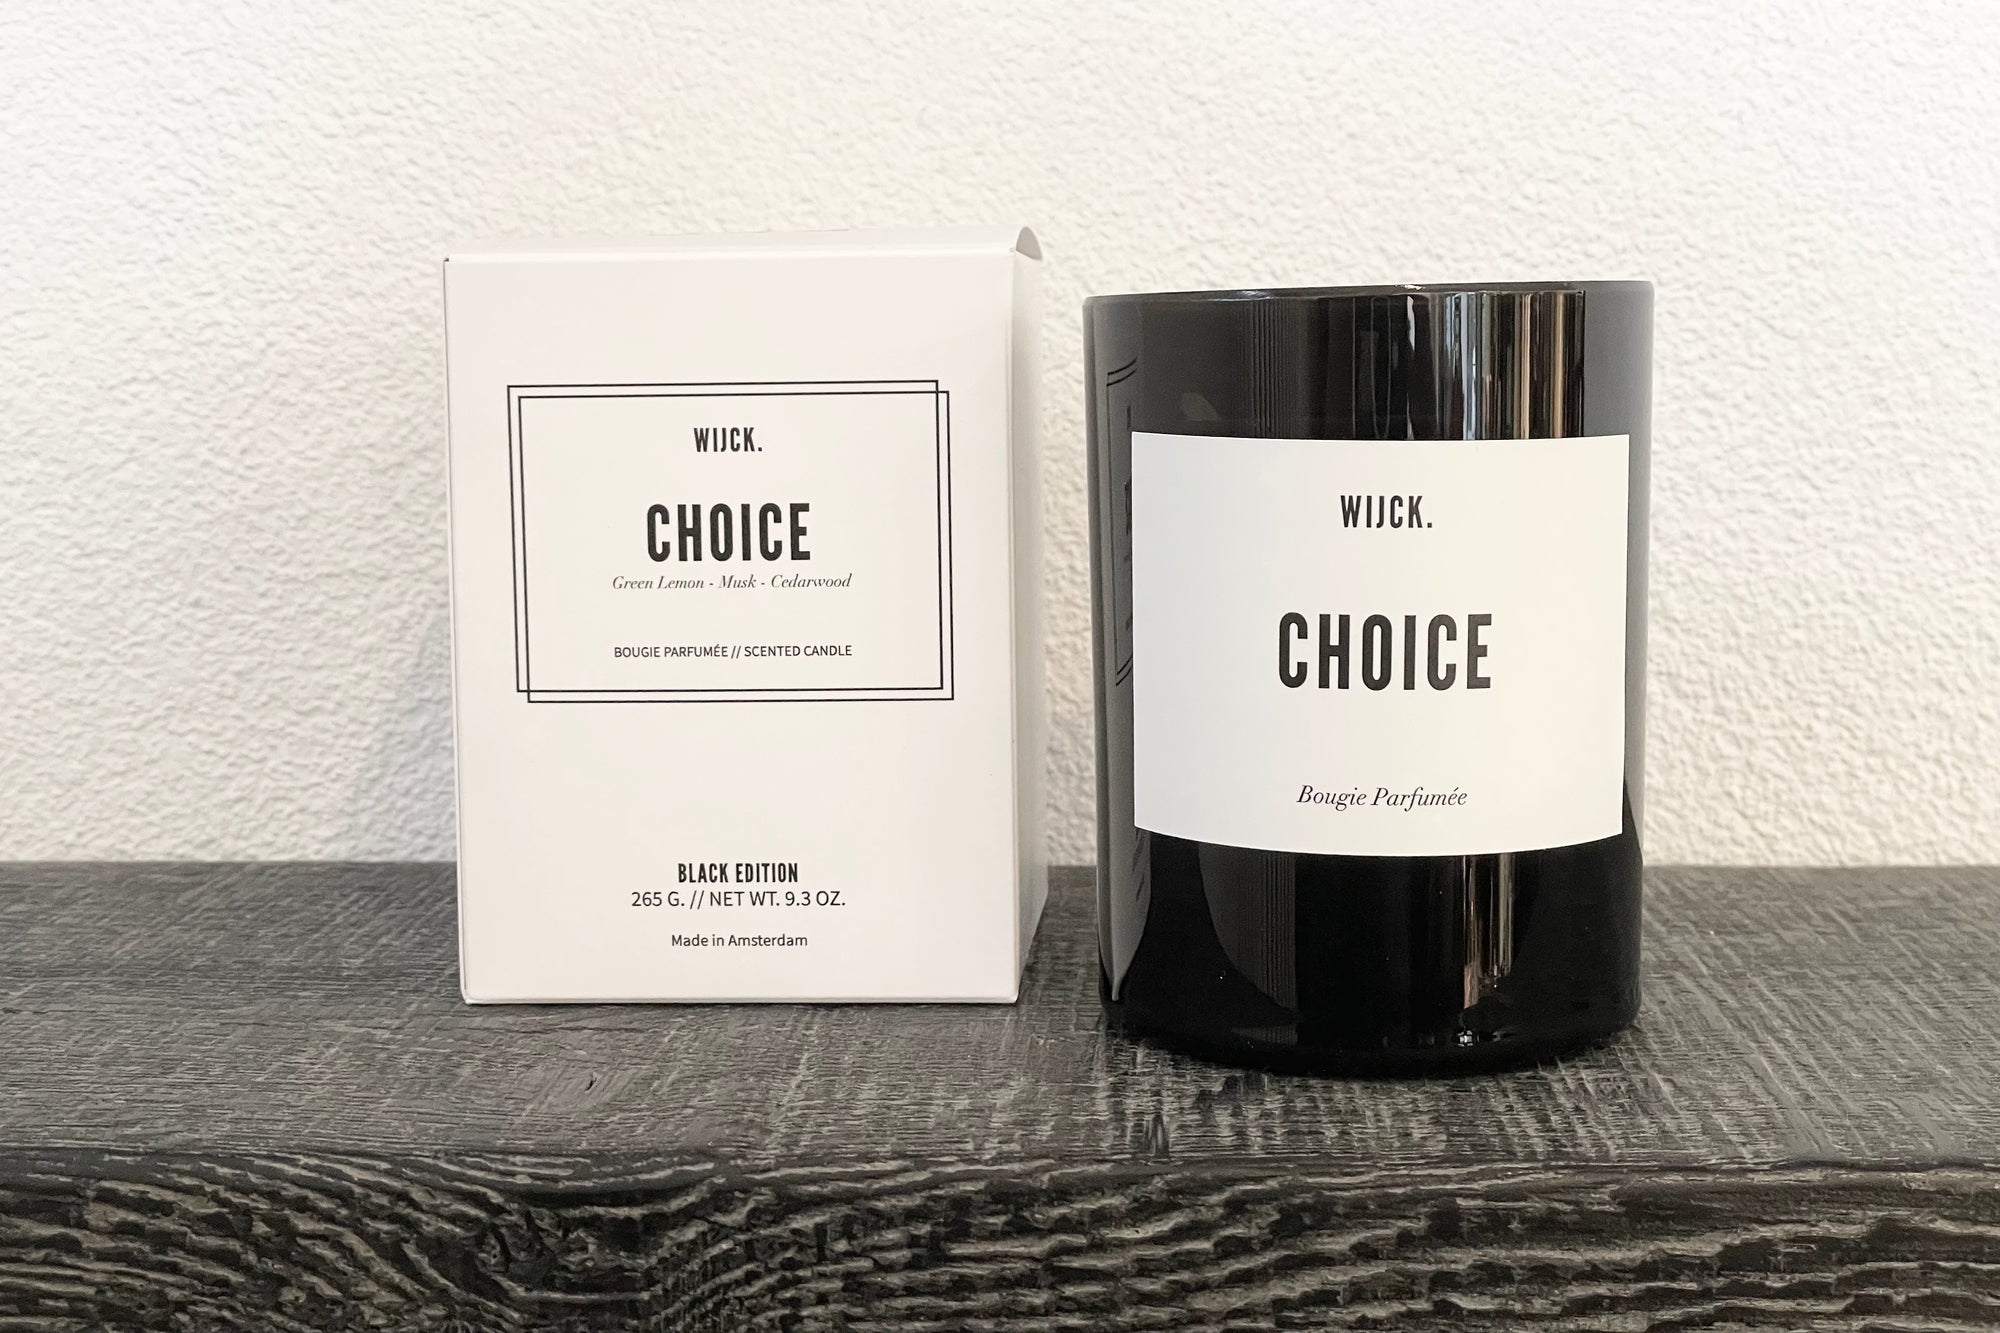 Choice by Réjane Rosenberger "CHOICE" scented candle